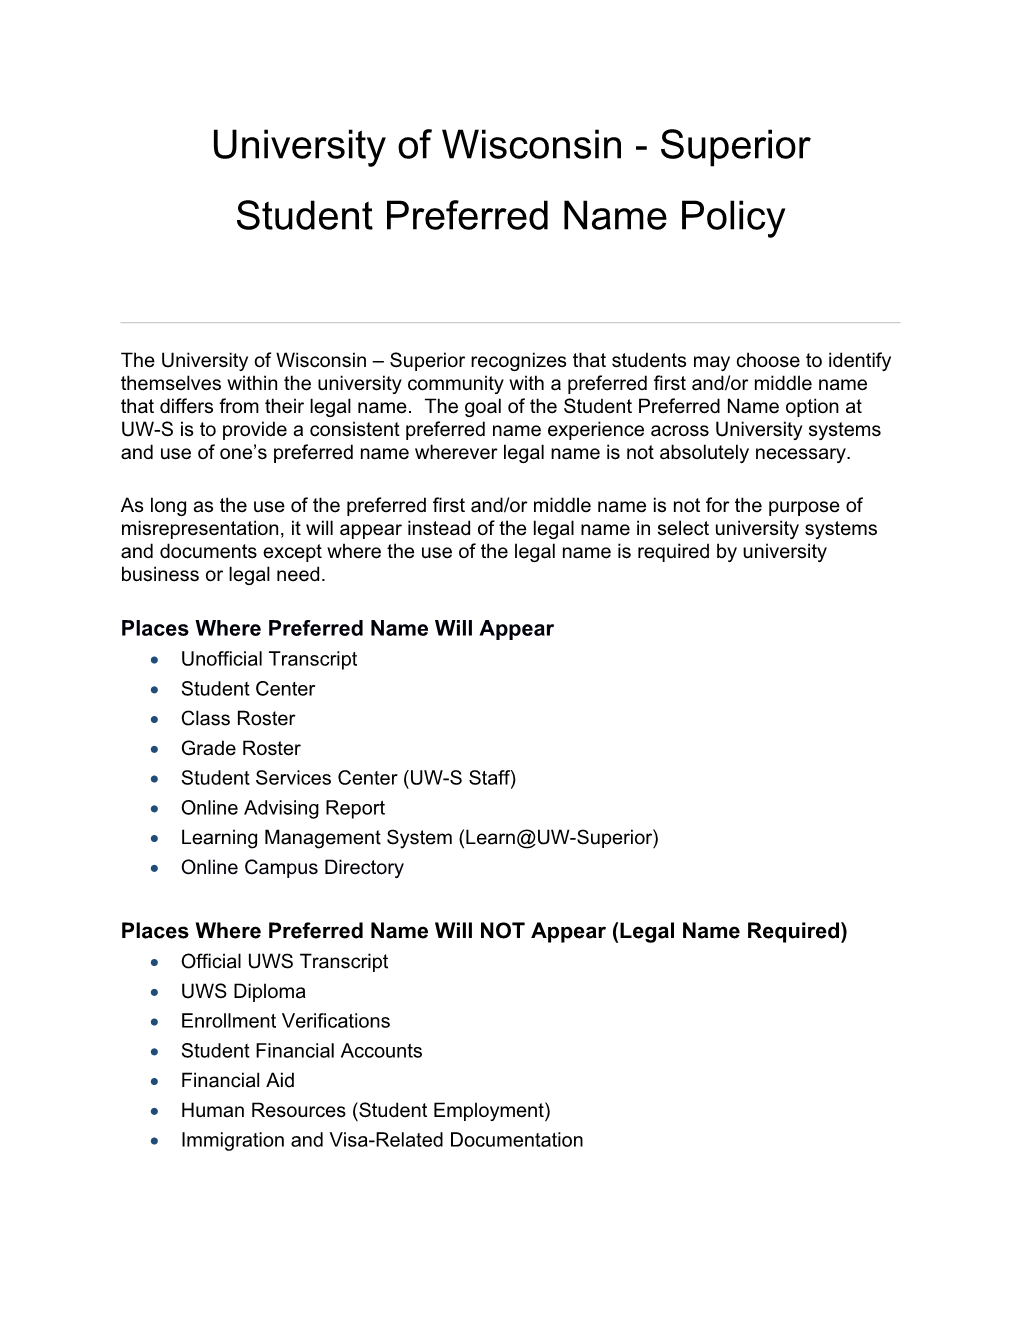 Student Preferred Name Policy